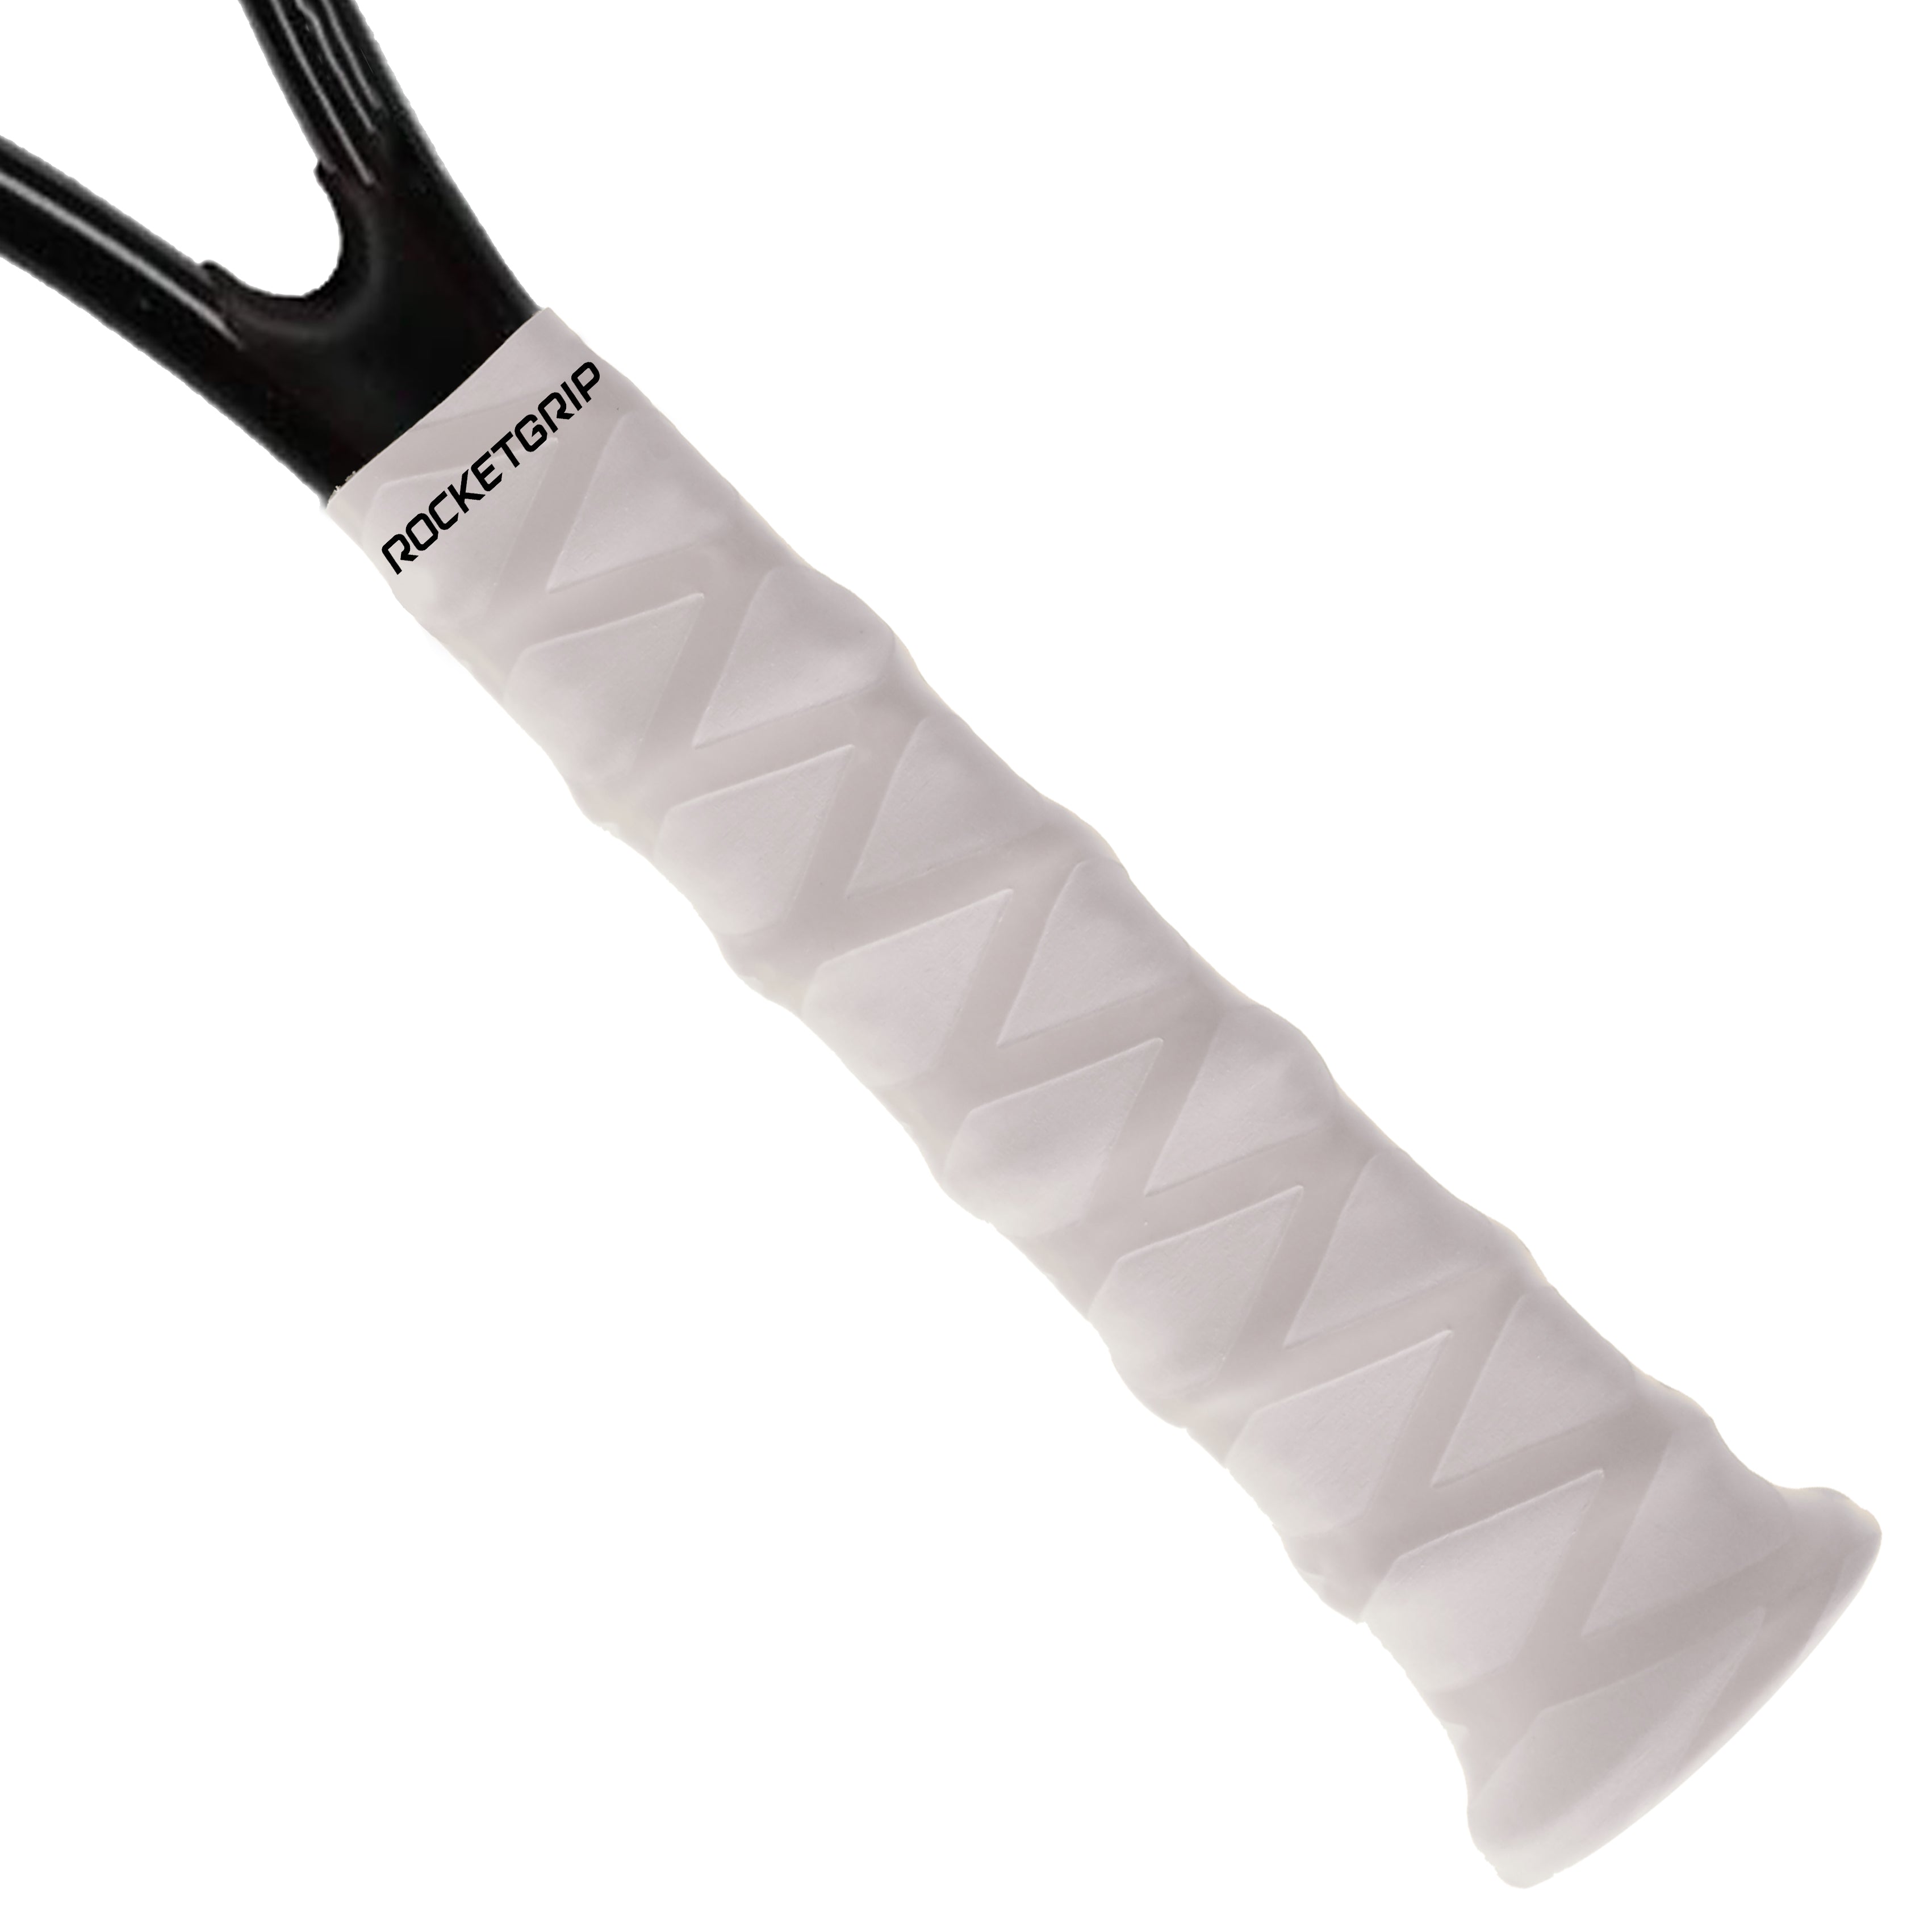 Ultra tennis overgrips (2-pack)